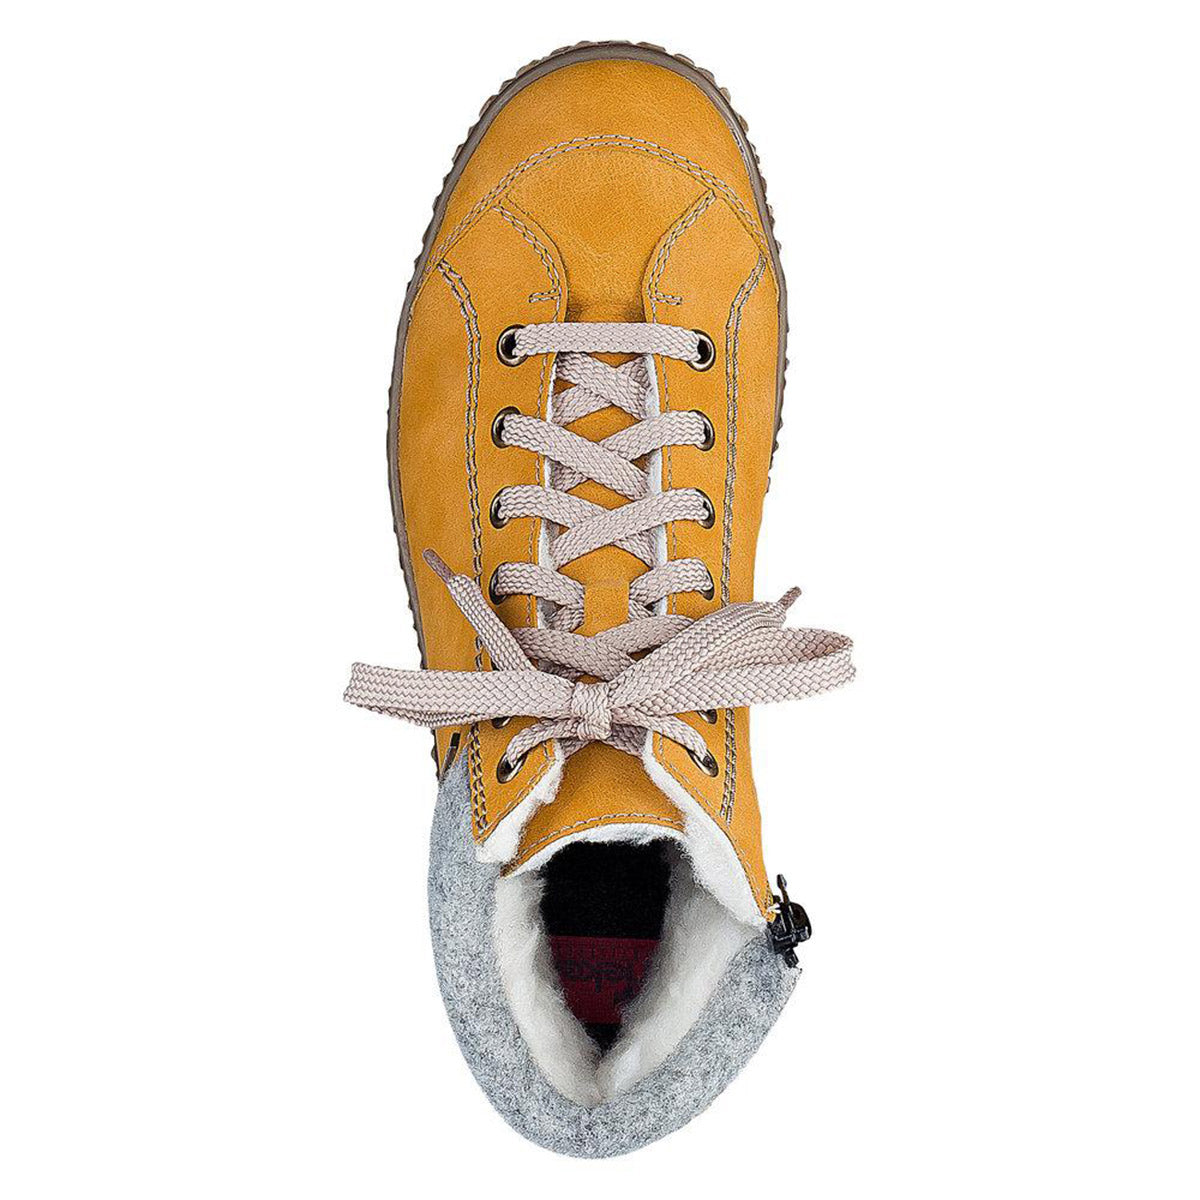 A single RIEKER WOOL CUFF HIGH TOP yellow winter boot with laces tied, viewed from above.